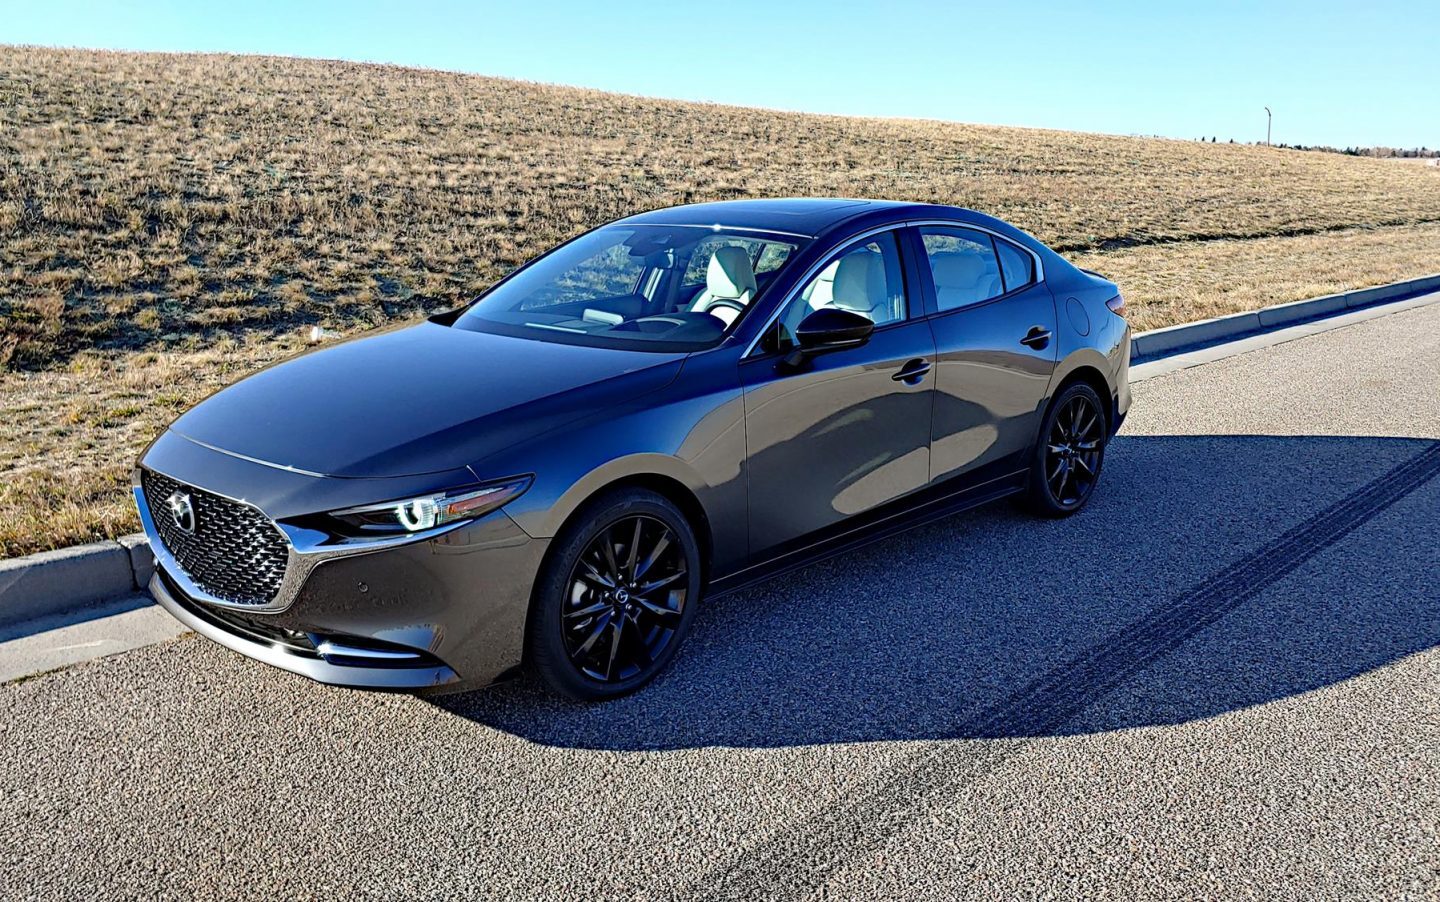 2021 Mazda3 Turbo Is a Game Changer